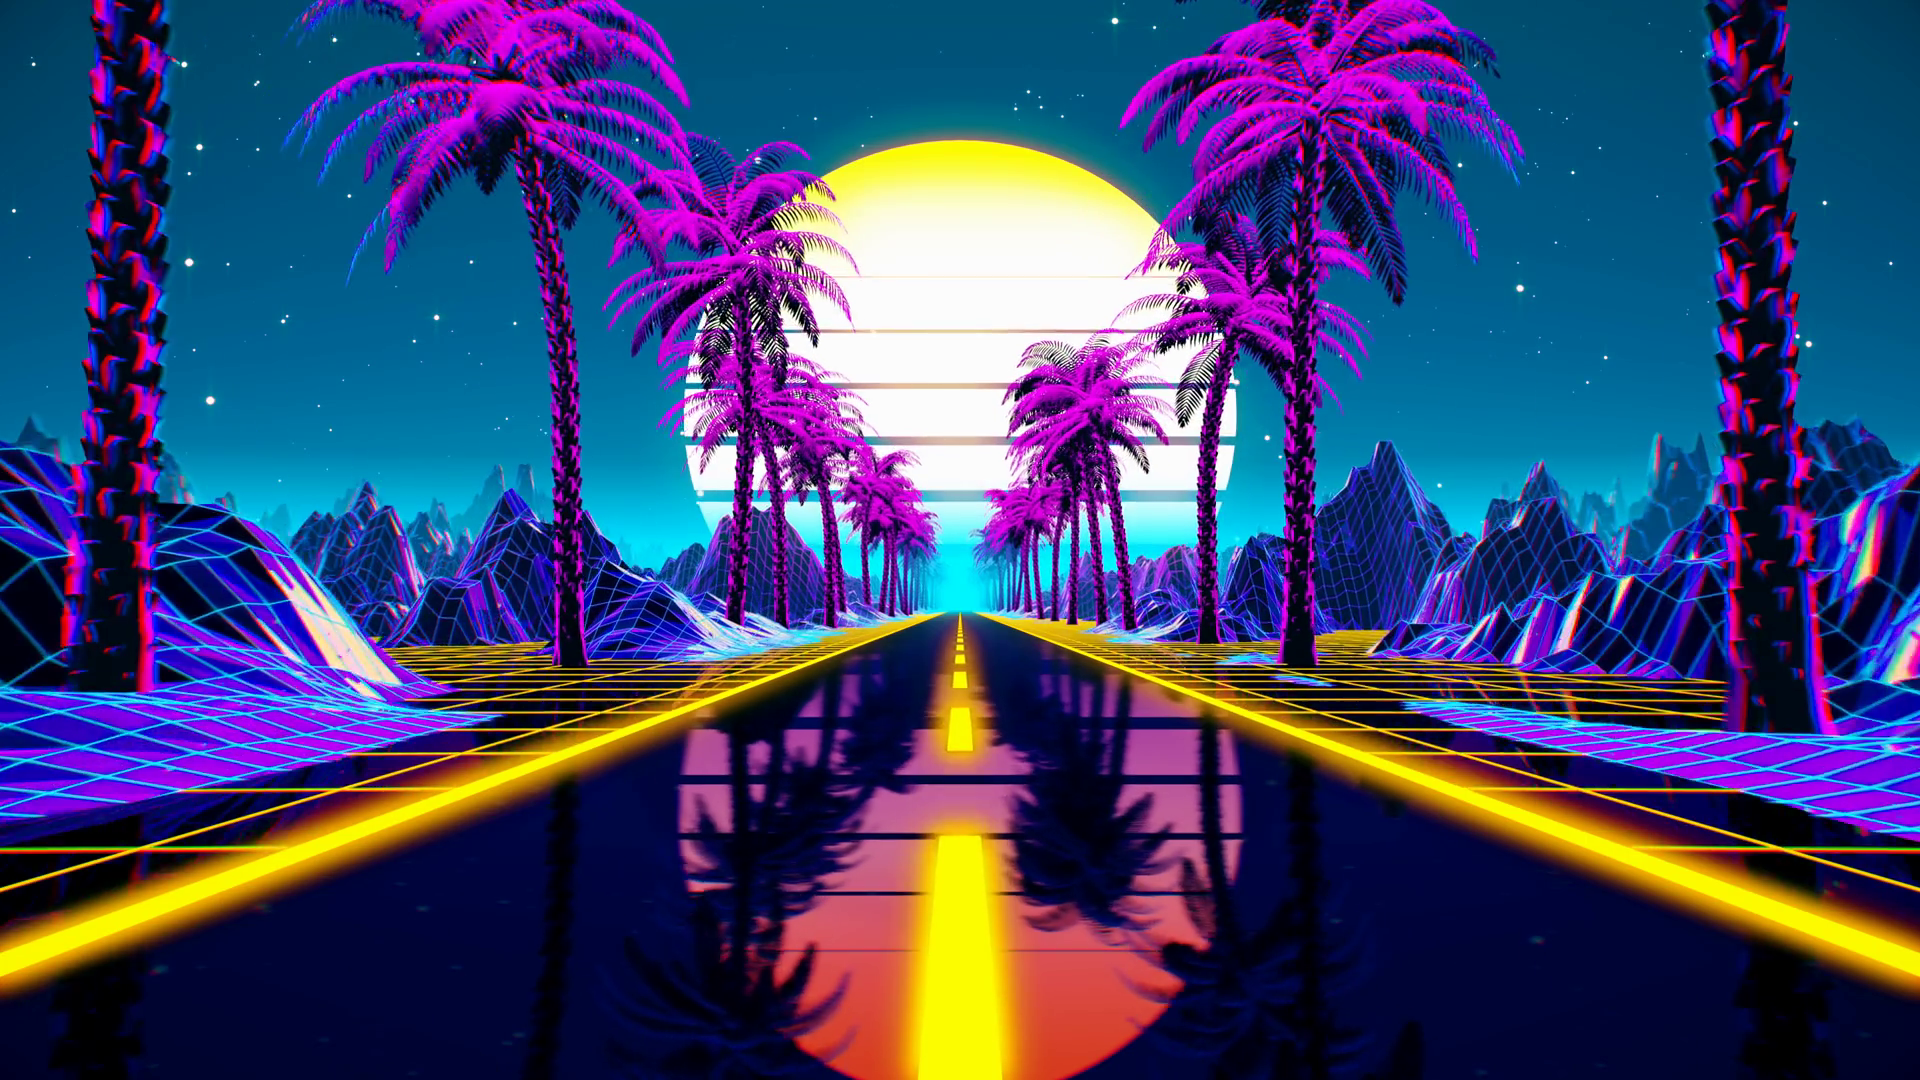 80s Retro Futuristic Sci Fi Seamless Loop. Retrowave VJ Videogame Landscape, Neon Lights And Low Poly Terrain Grid. Stylized Vintage Vaporwave 3D Animation Background With Mountains, Sun And Stars. 4K Motion Background